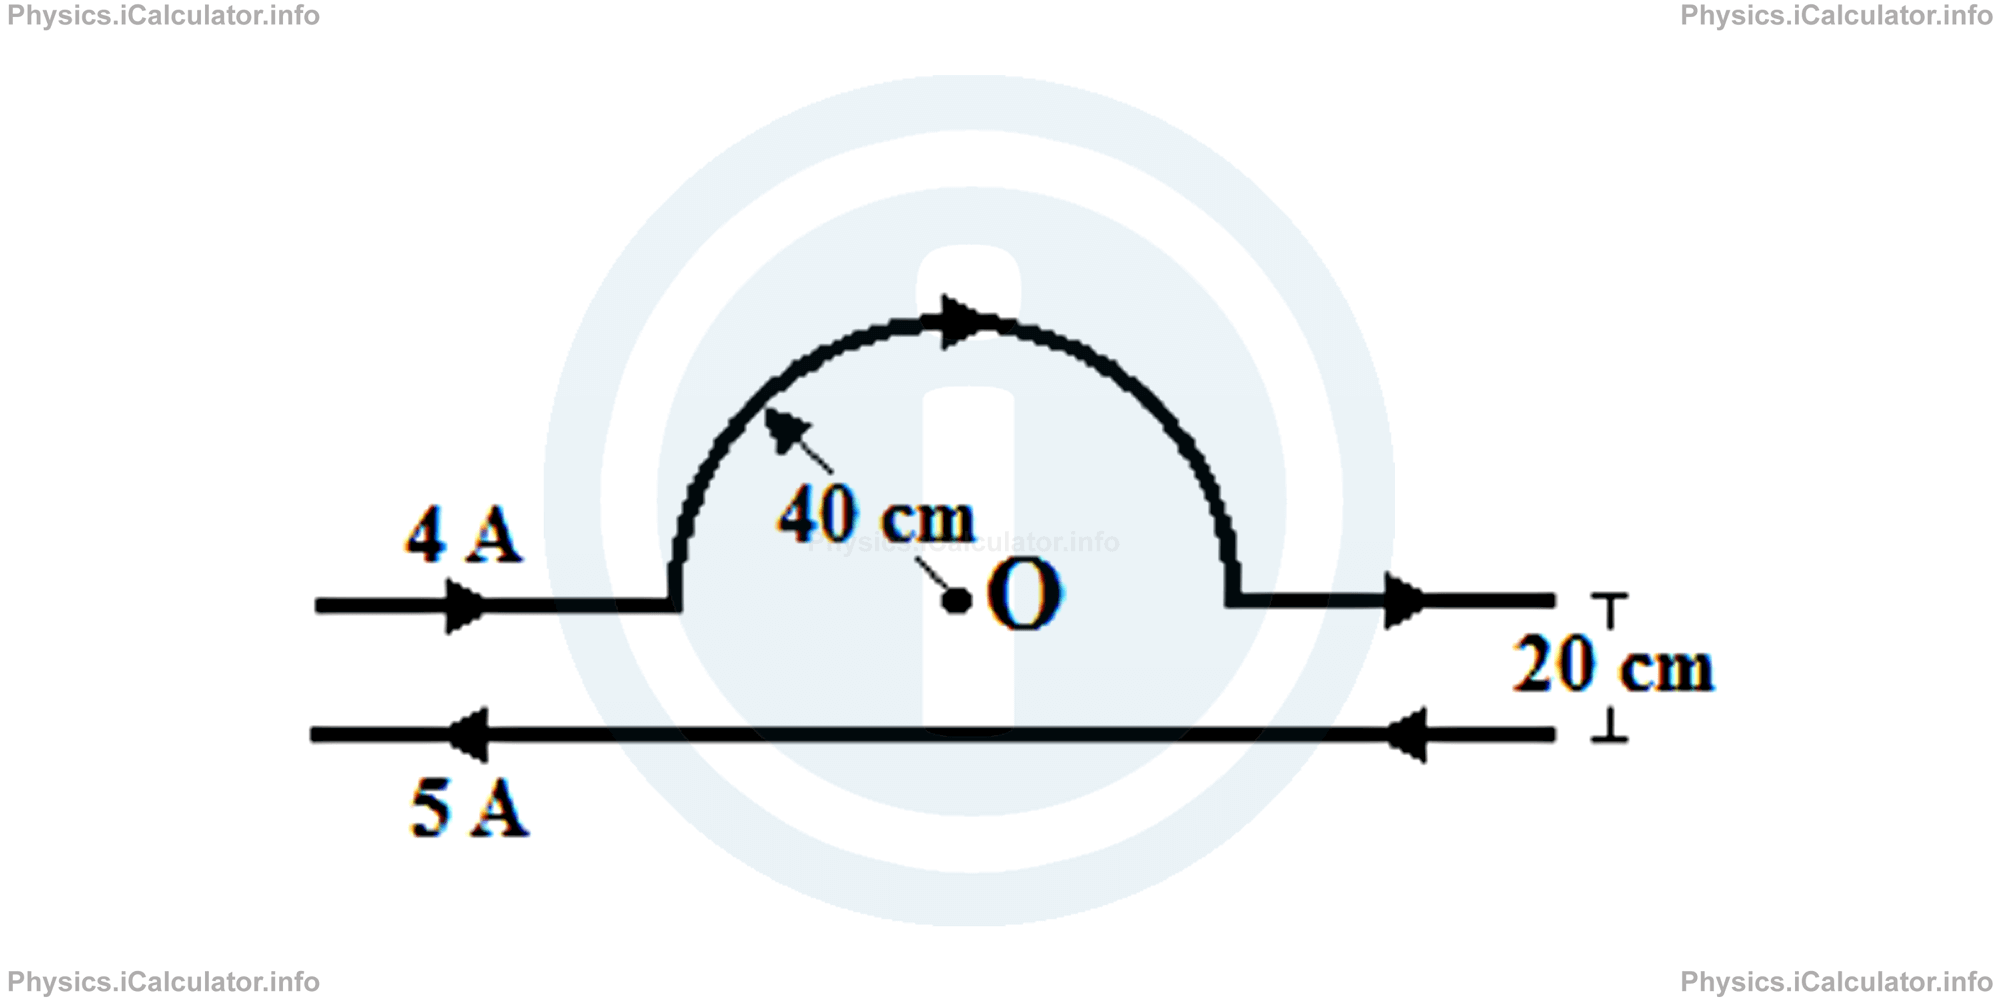 Physics Tutorials: This image provides visual information for the physics tutorial Magnetic Field Produced by Electric Currents 